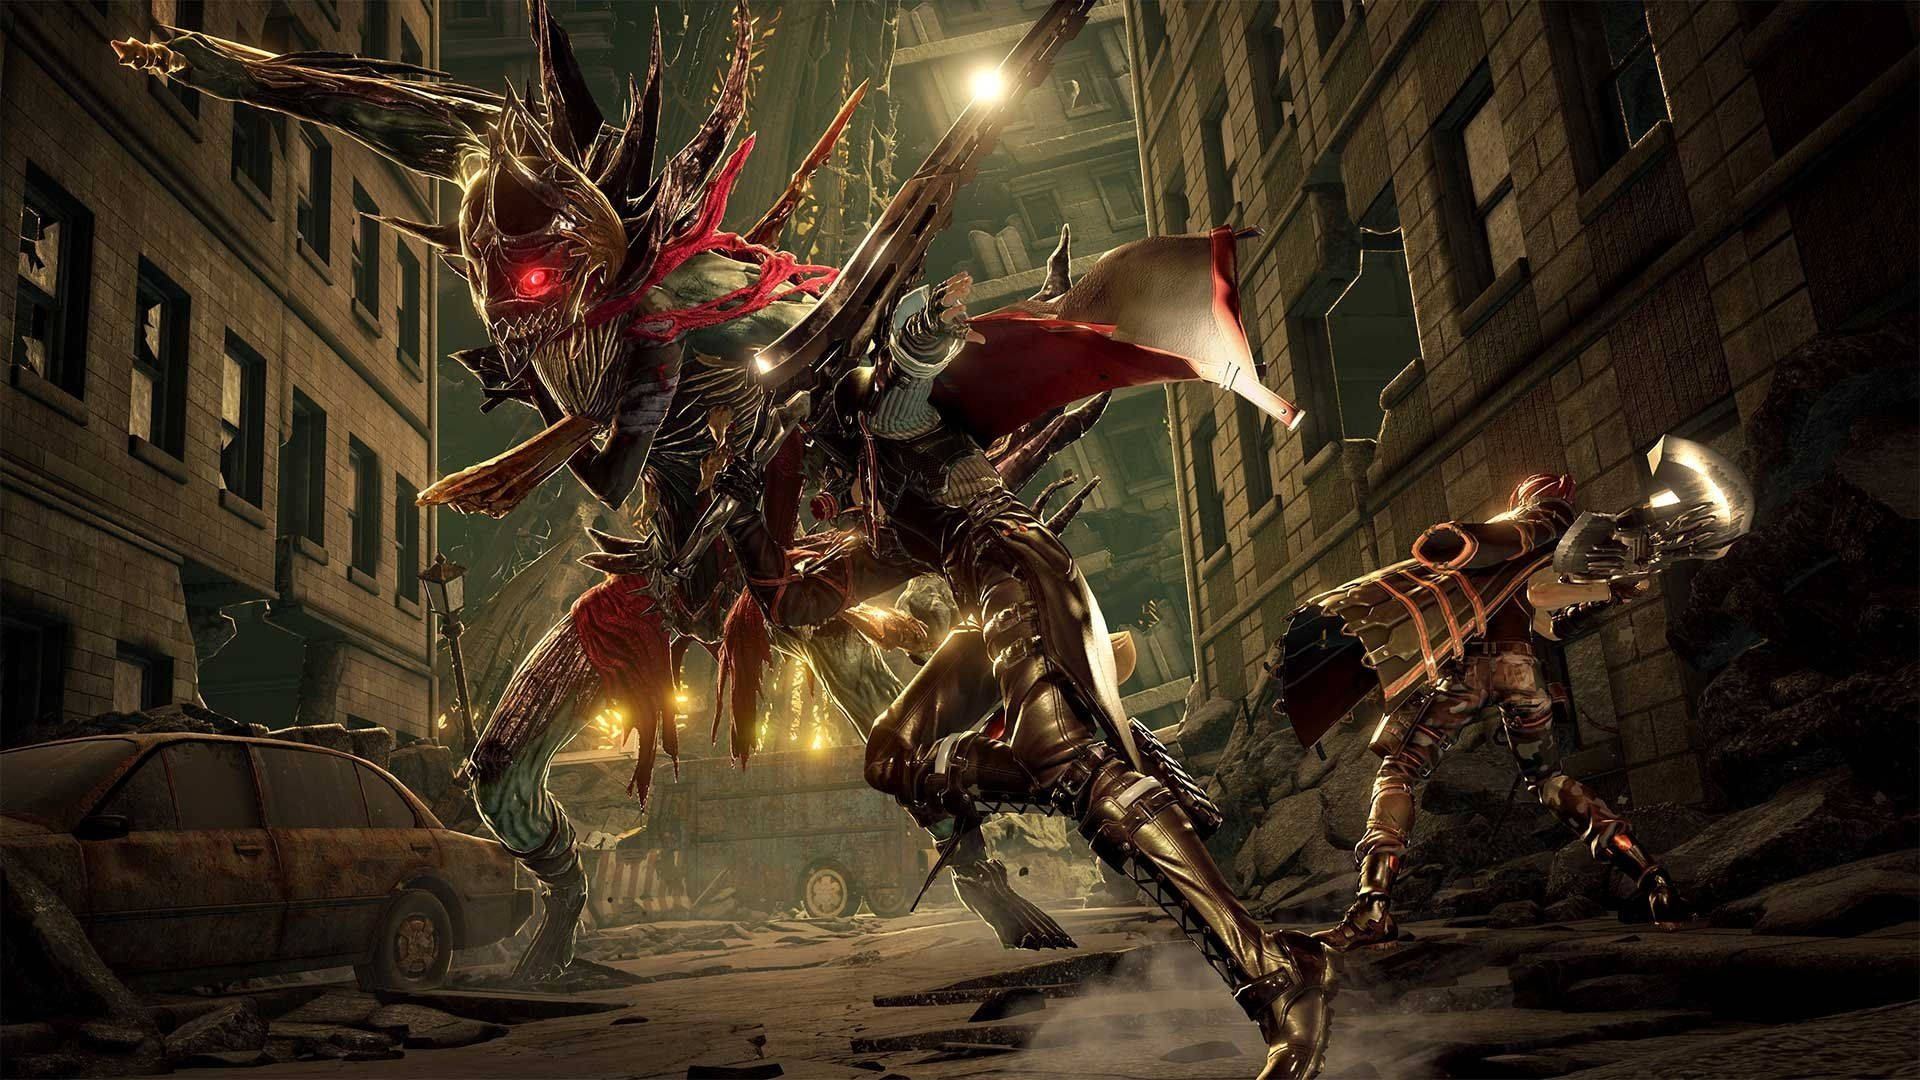 Explore and discover the world of Code Vein Wallpaper